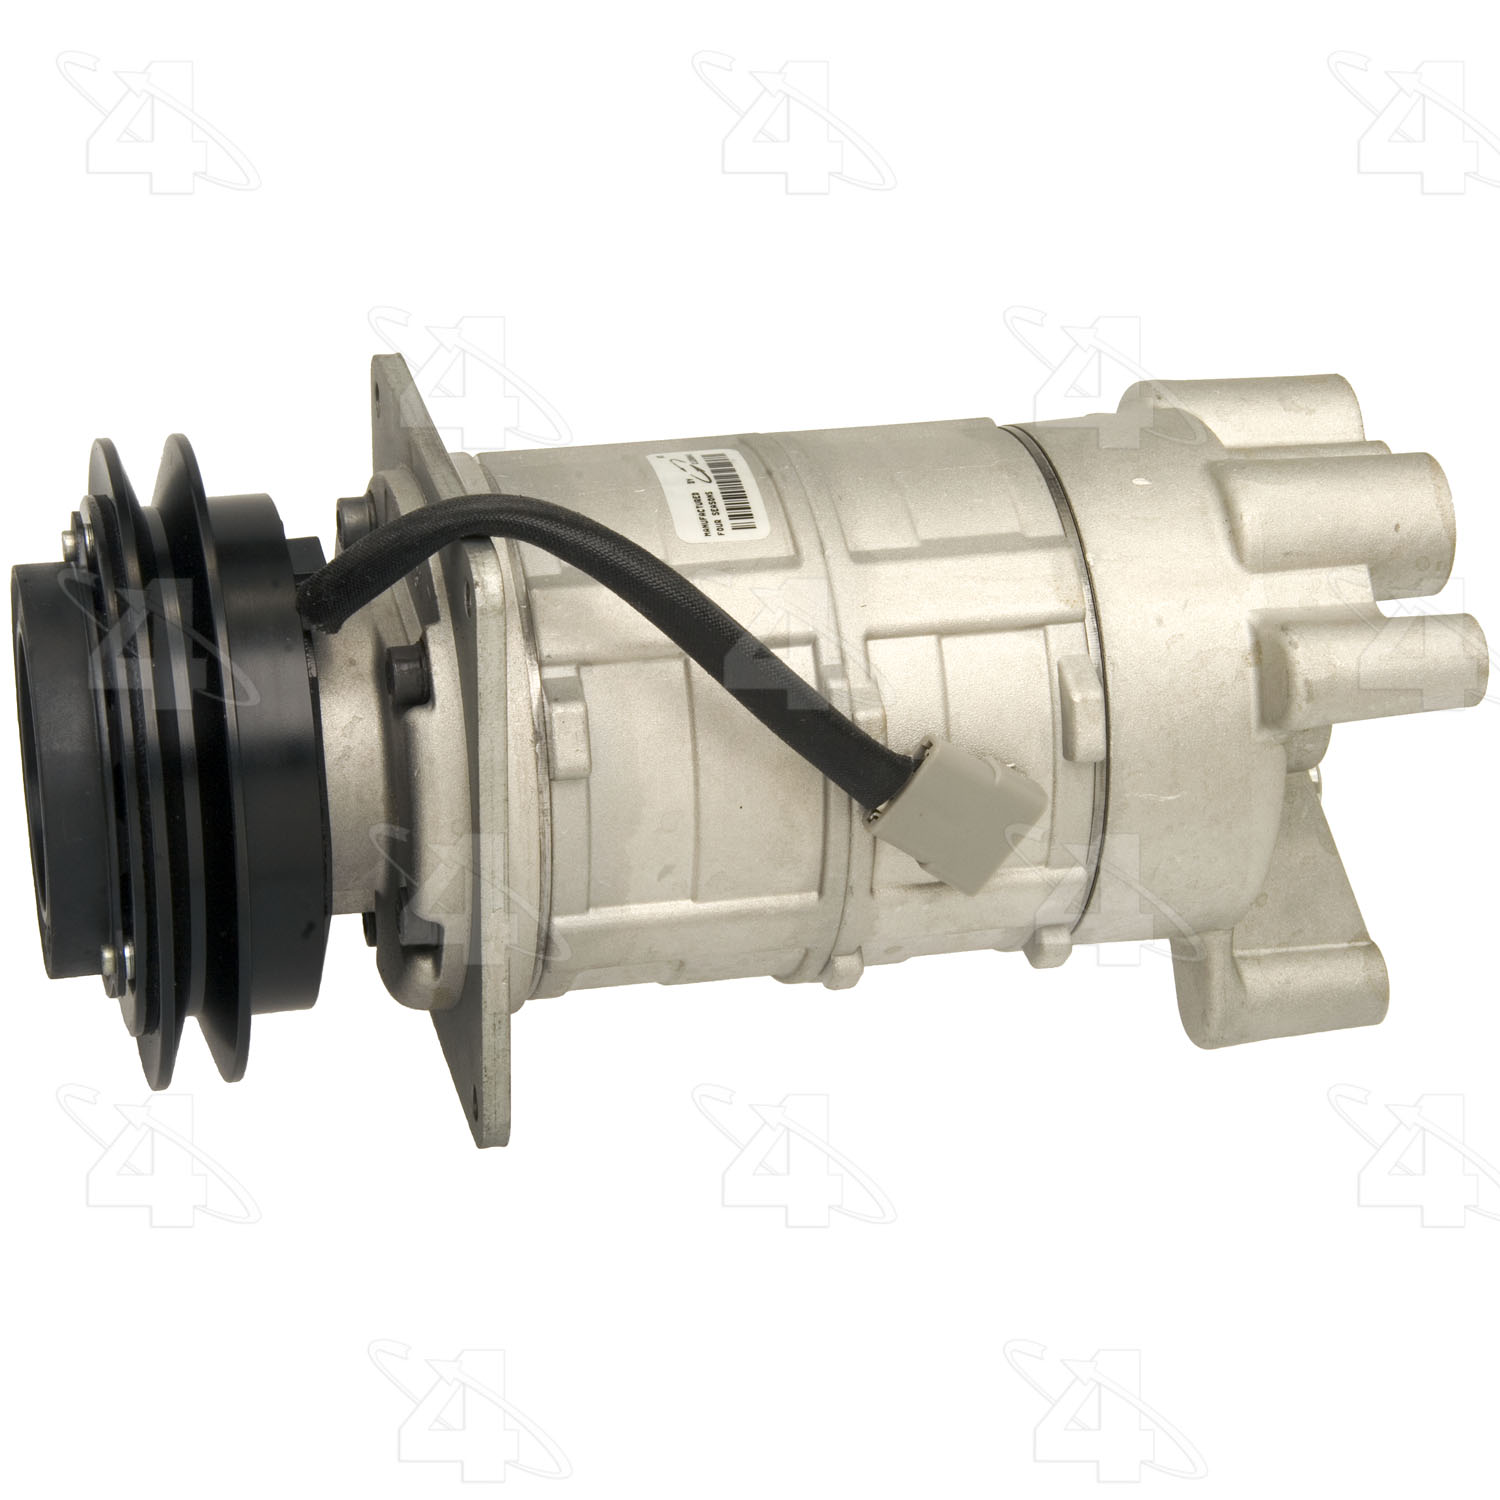 Image of ID 58096 Four Seasons 58096 A/C Compressor Fits 1982-1985 Buick Electra